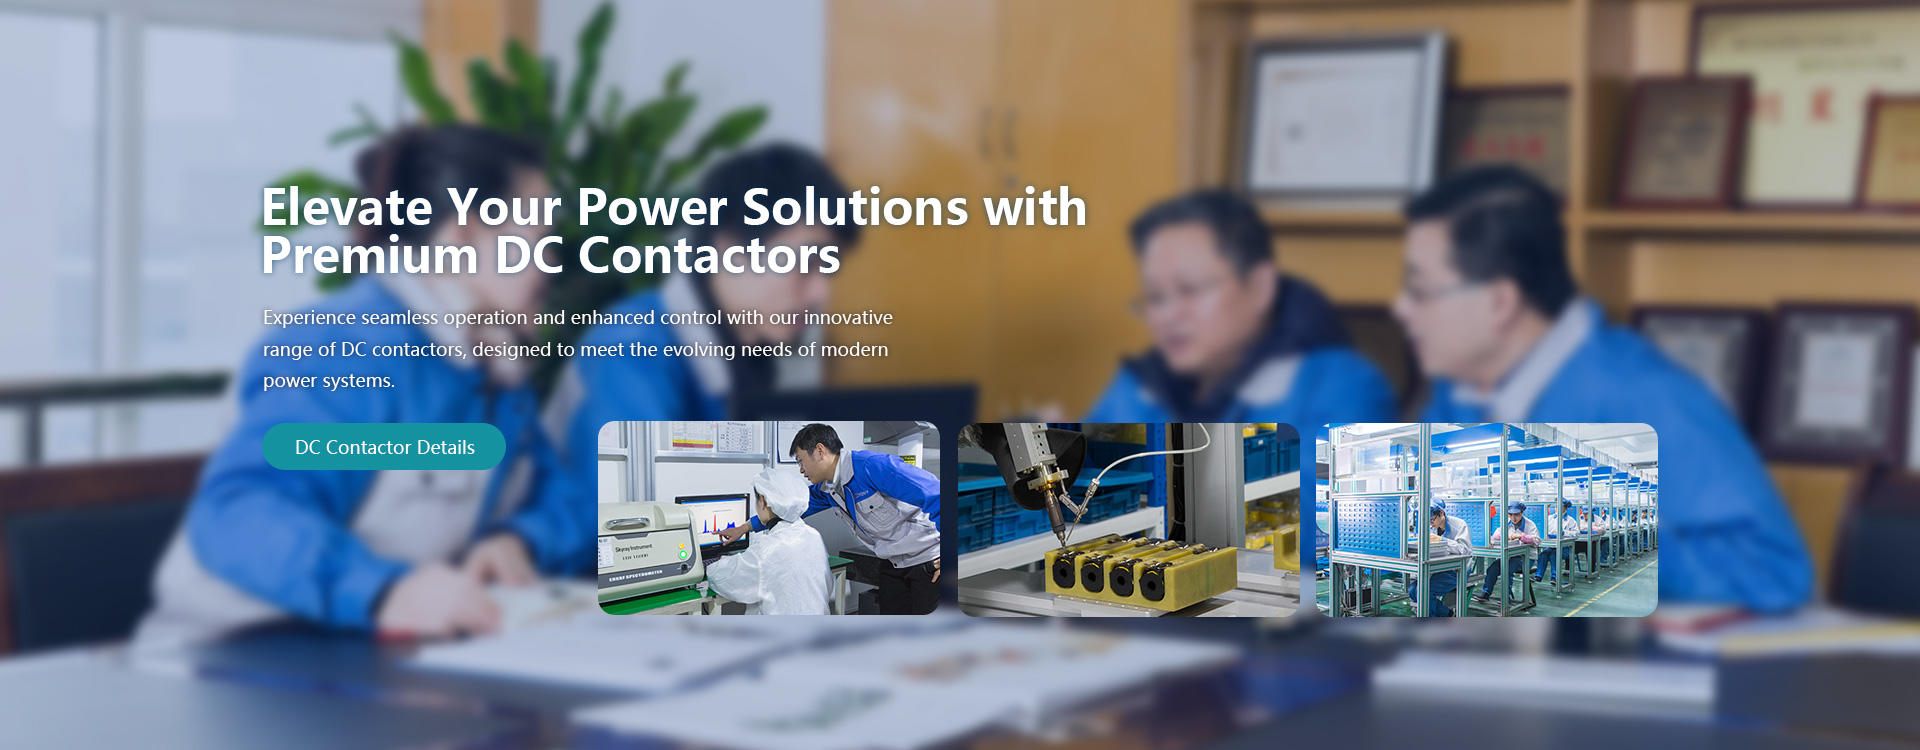 Elevate Your Power Solutions with Premium DC Contactors